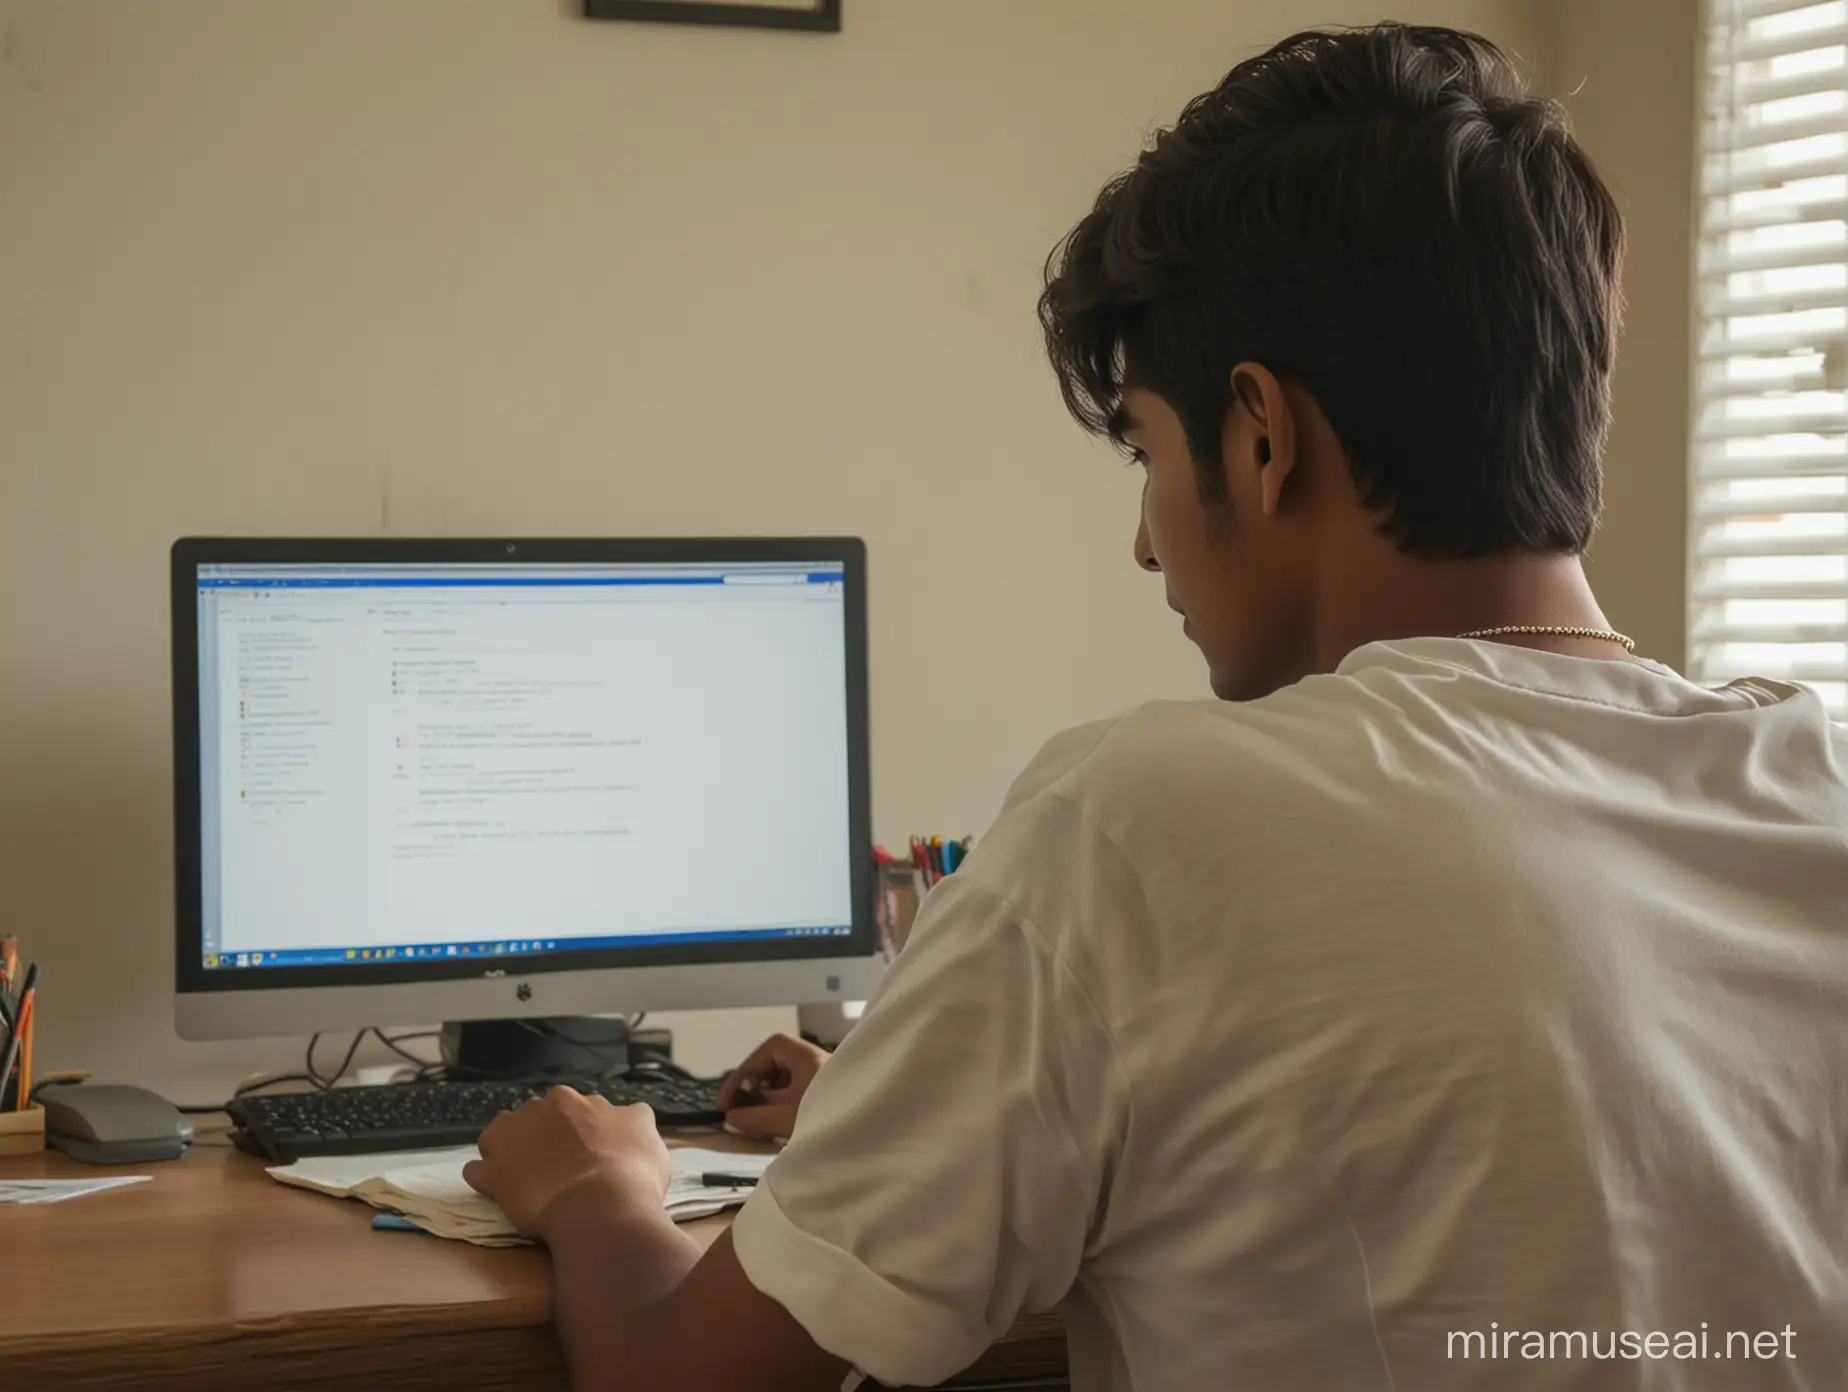 Indian Youth Writing on Computer in Room